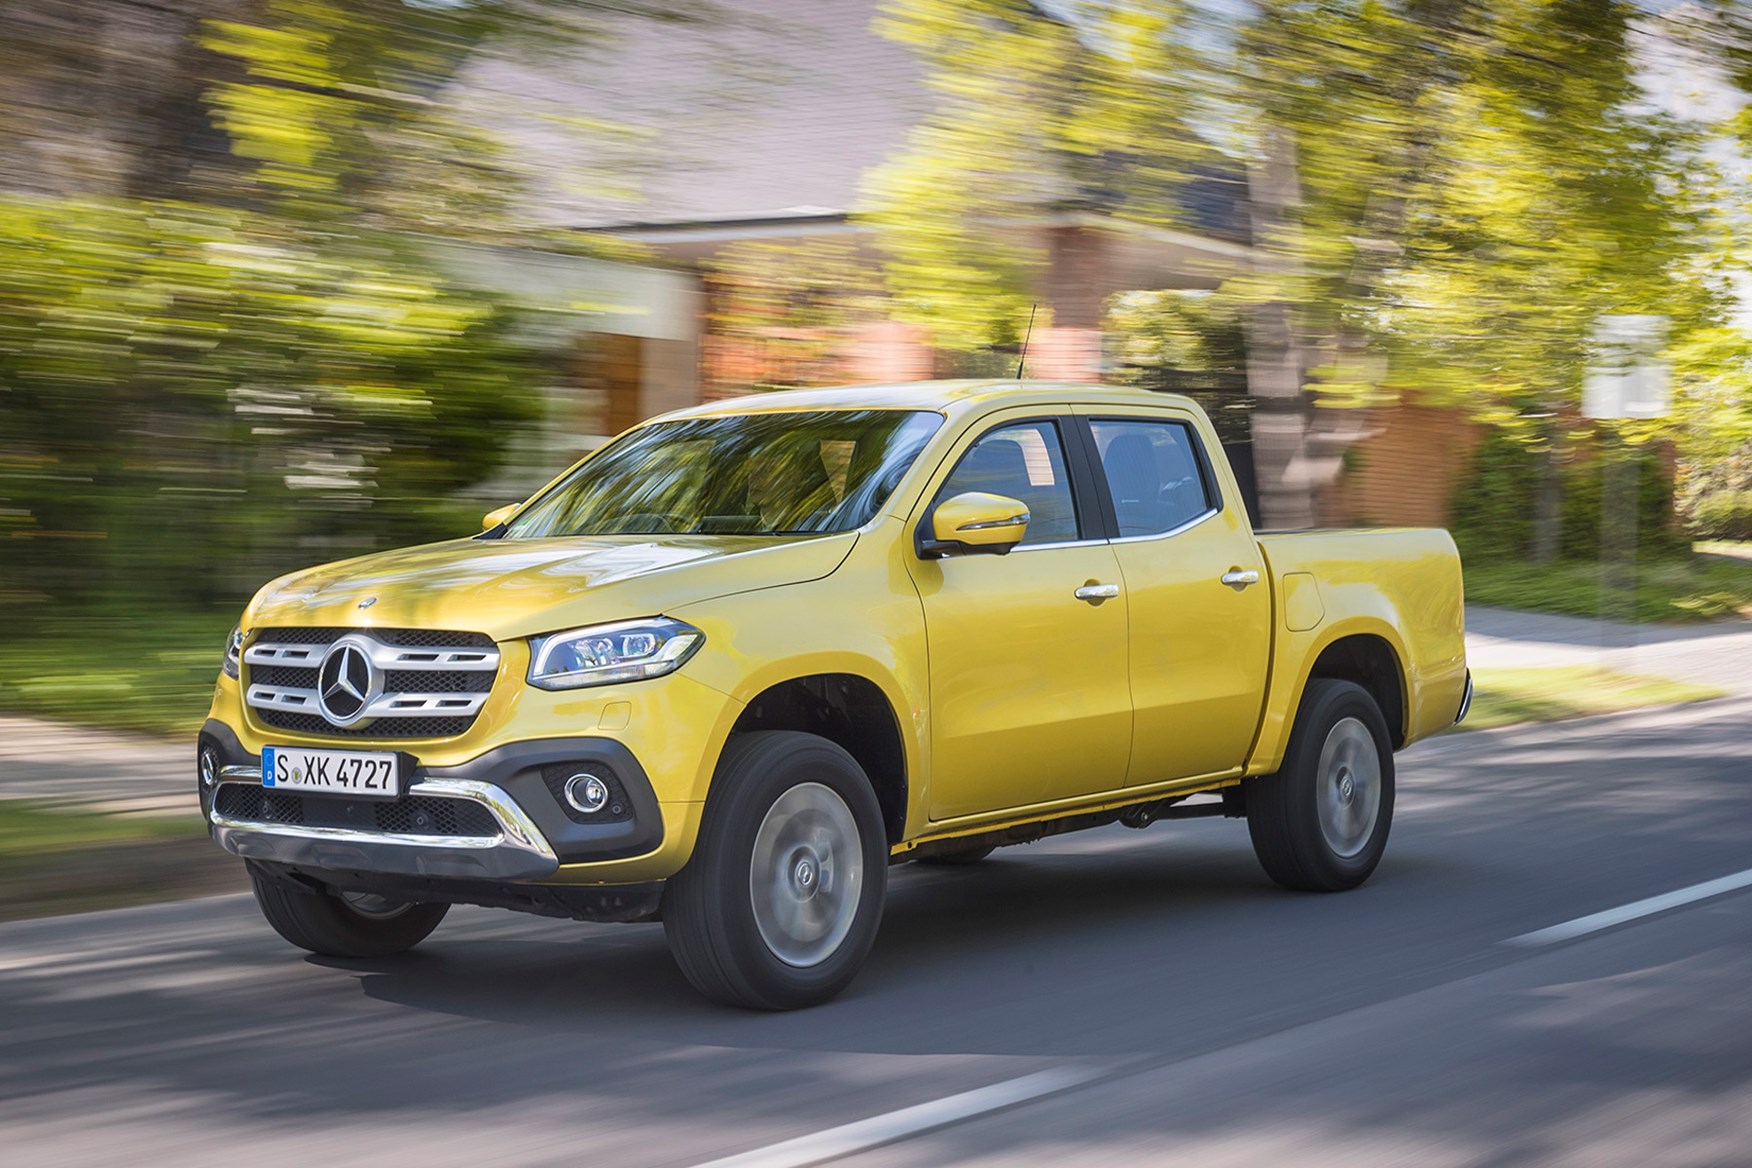 Mercedes-Benz X-Class full review on Parkers Vans - in motion